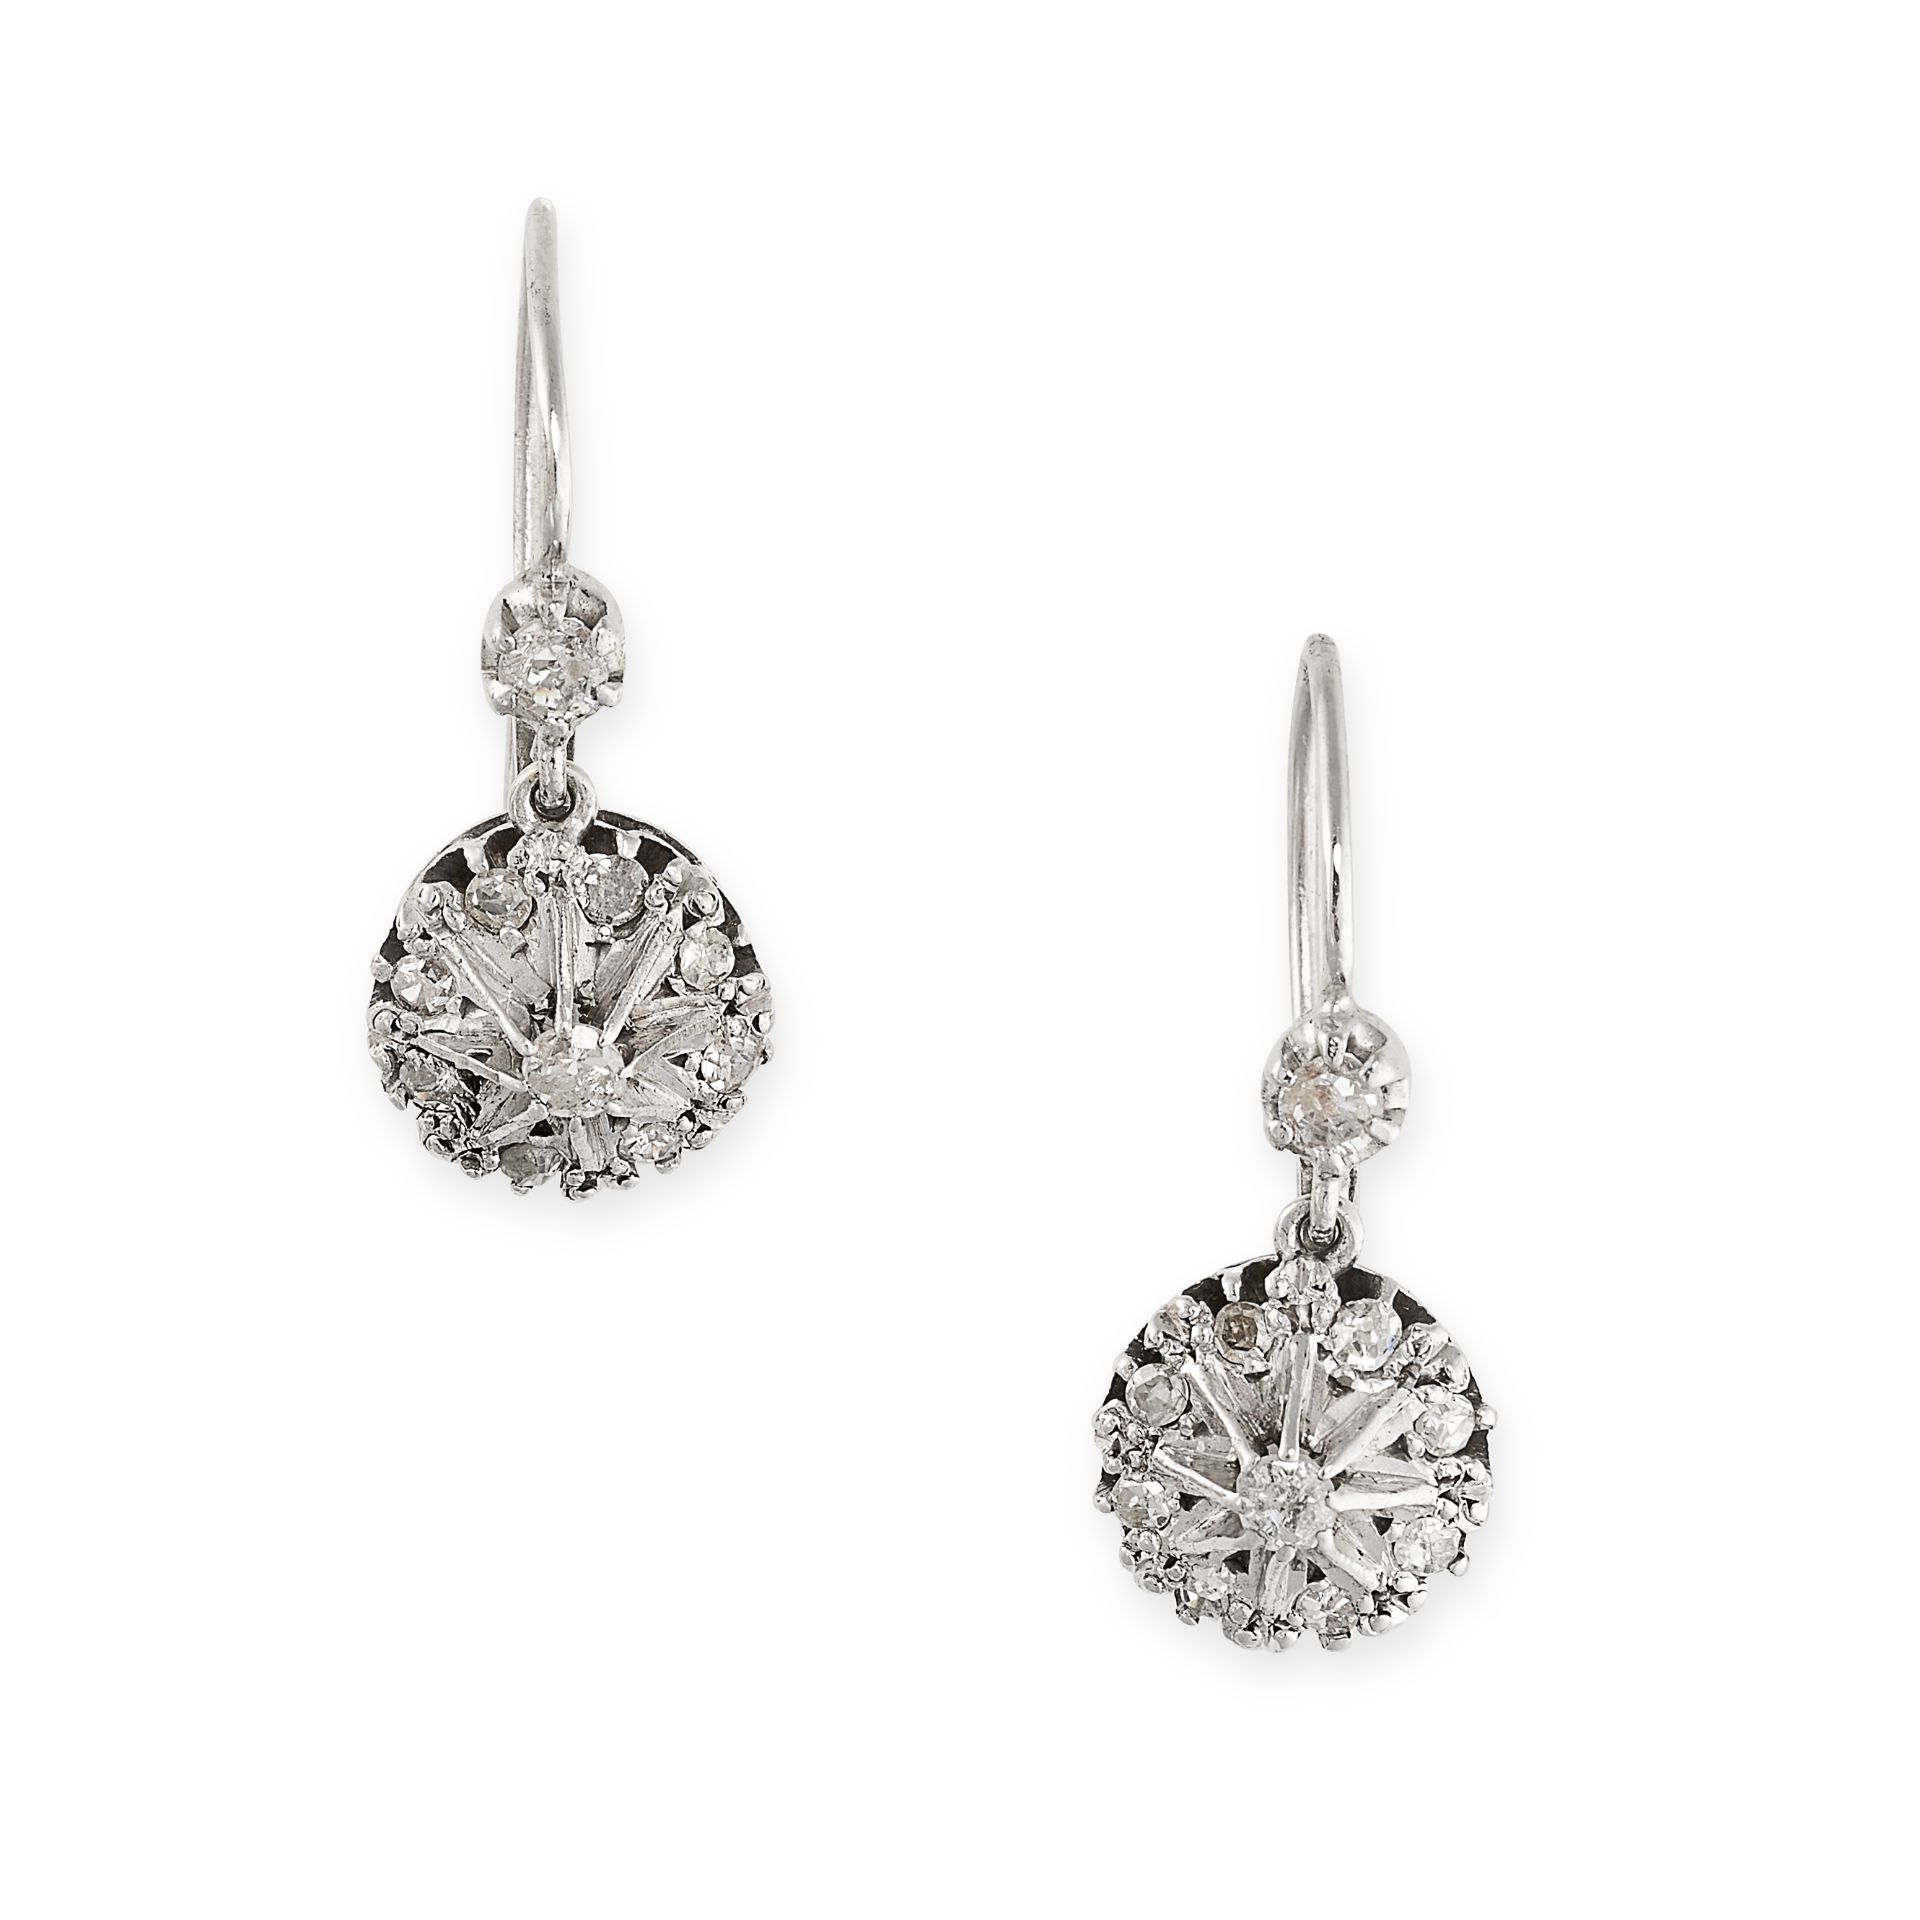 A PAIR OF VINTAGE DIAMOND DROP EARRINGS in white gold, each set with a cluster of single cut